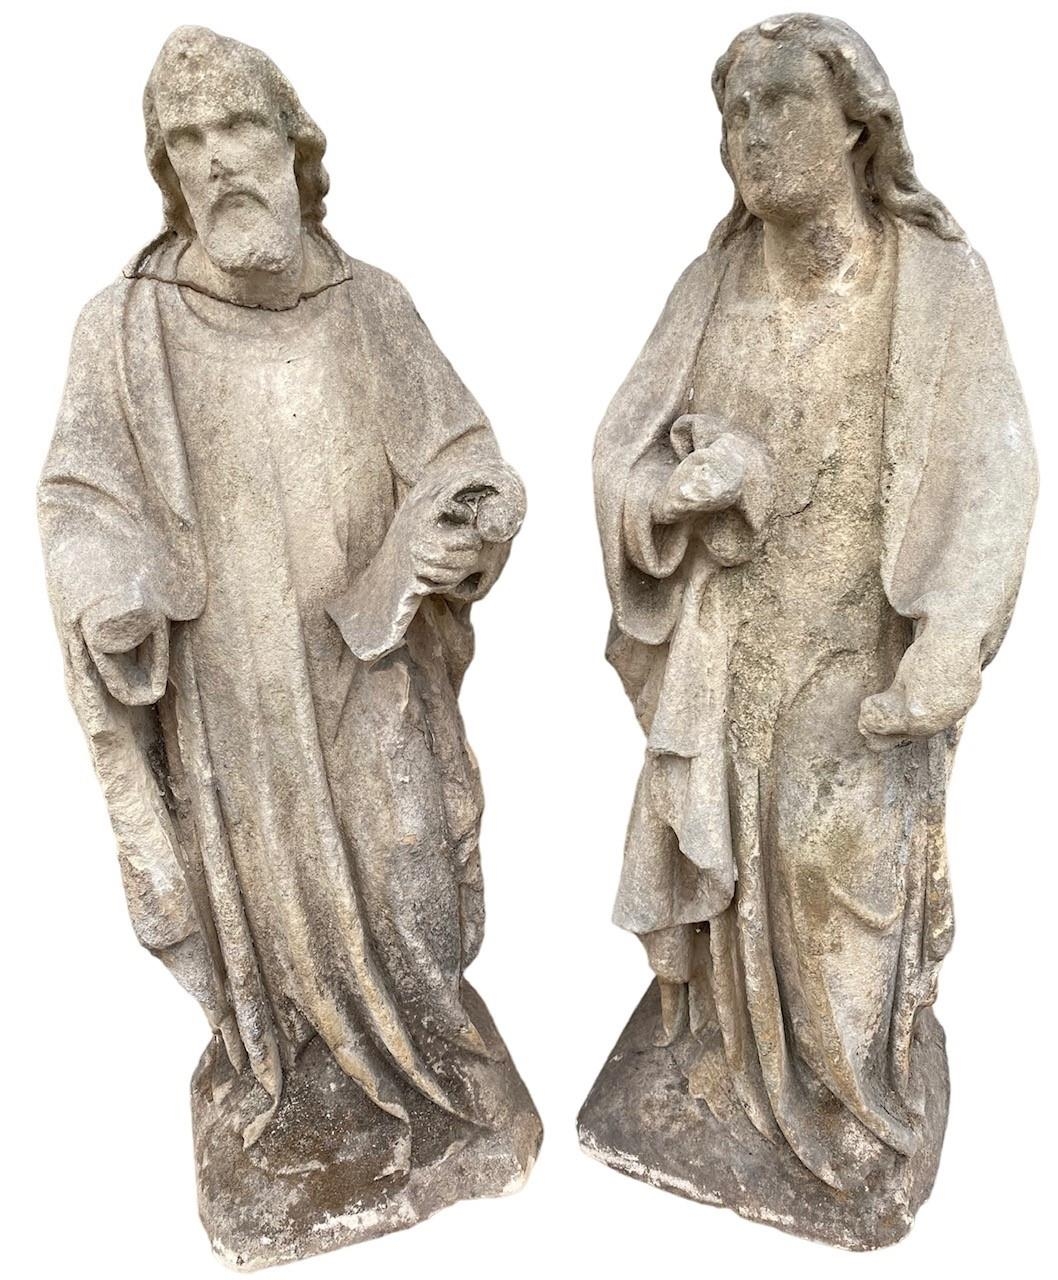 A PAIR OF 18TH CENTURY CARVED LIMESTONE FIGURES OF JOSEPH AND MARY. (h 71cm)